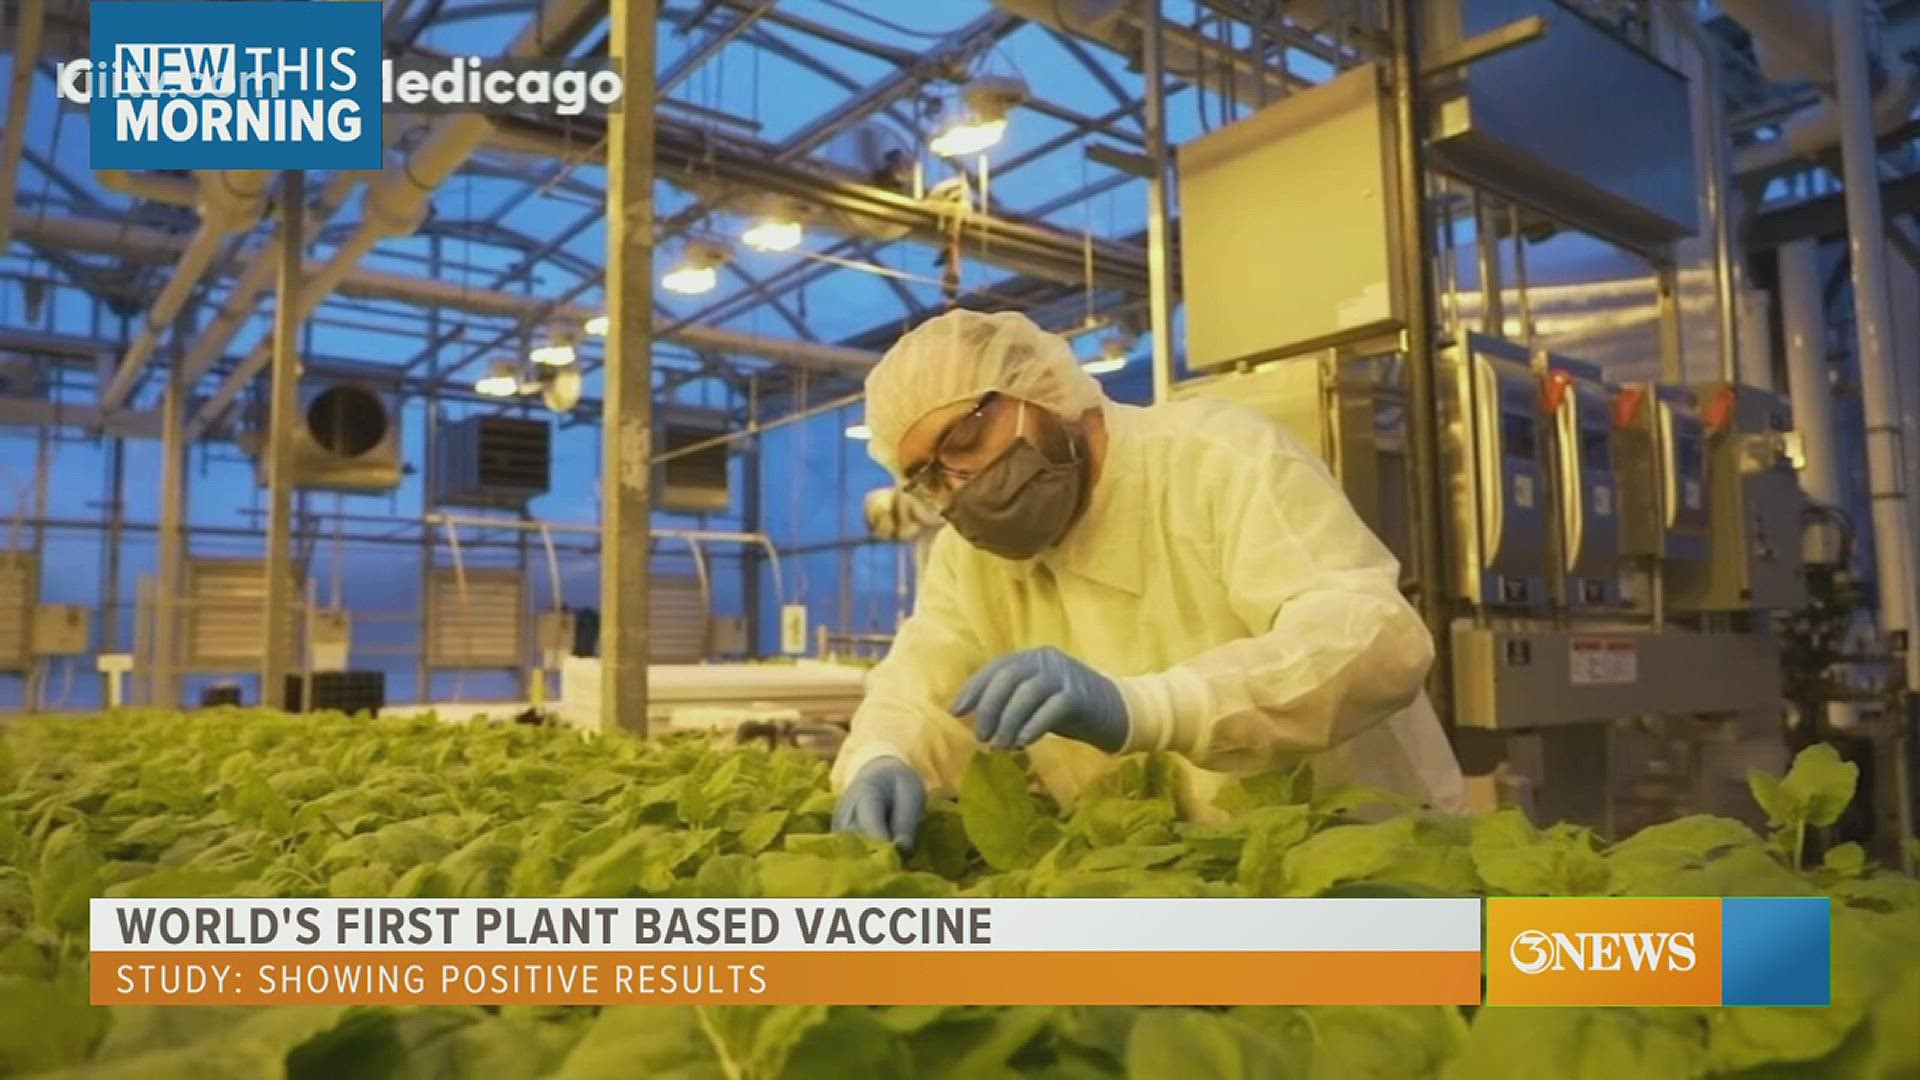 Research is showing positive results for a plant-based vaccine for COVID-19.